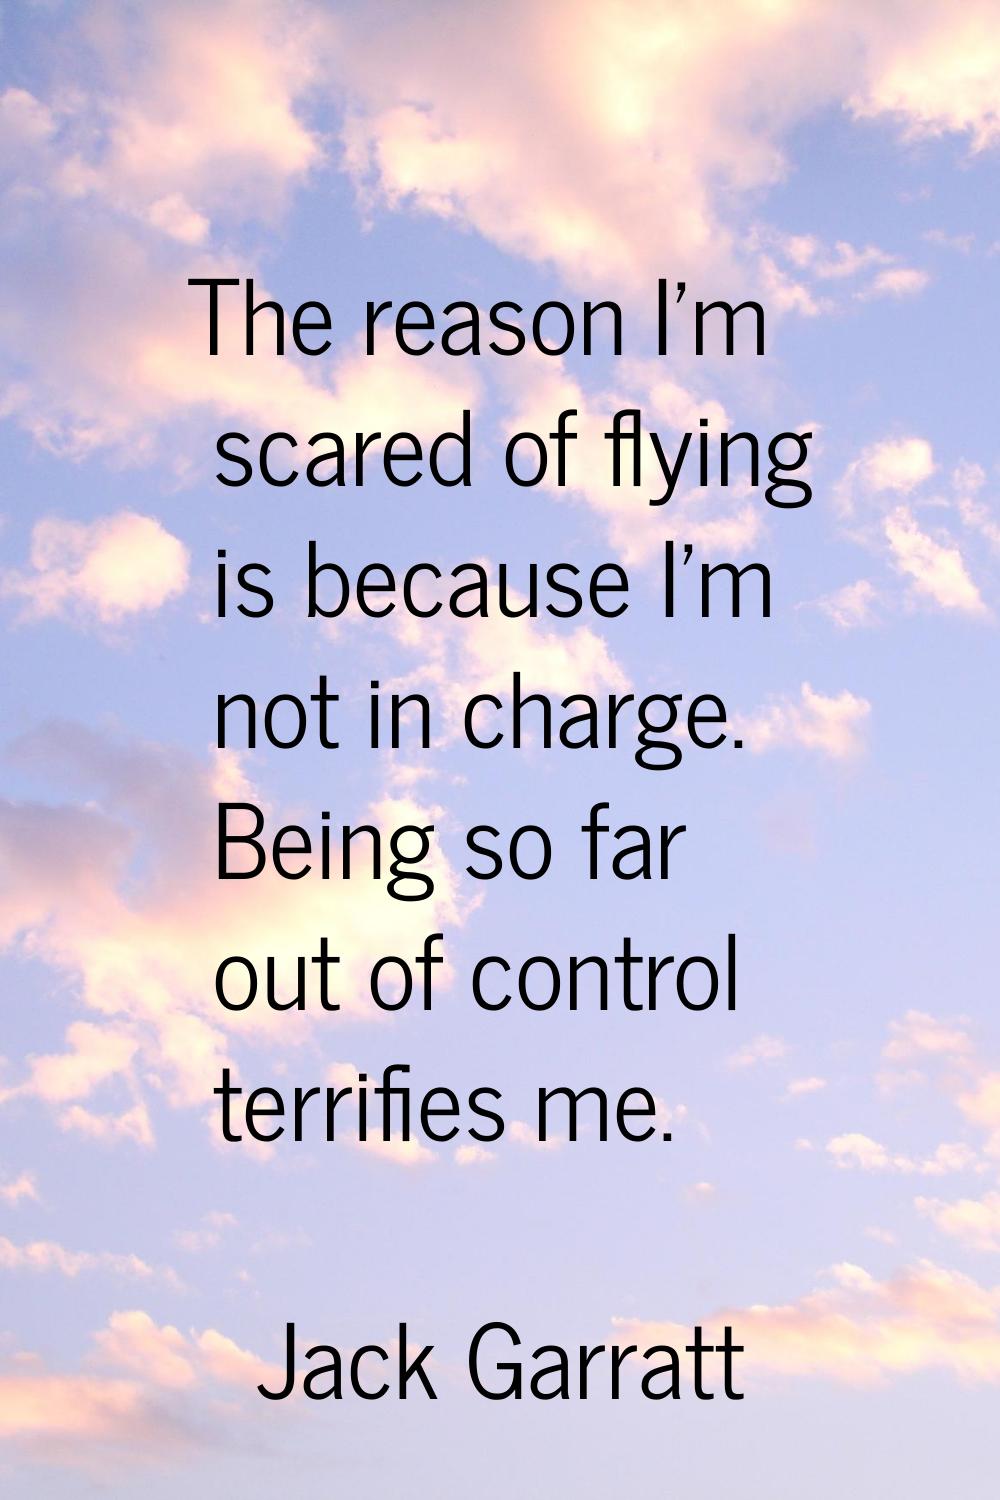 The reason I'm scared of flying is because I'm not in charge. Being so far out of control terrifies